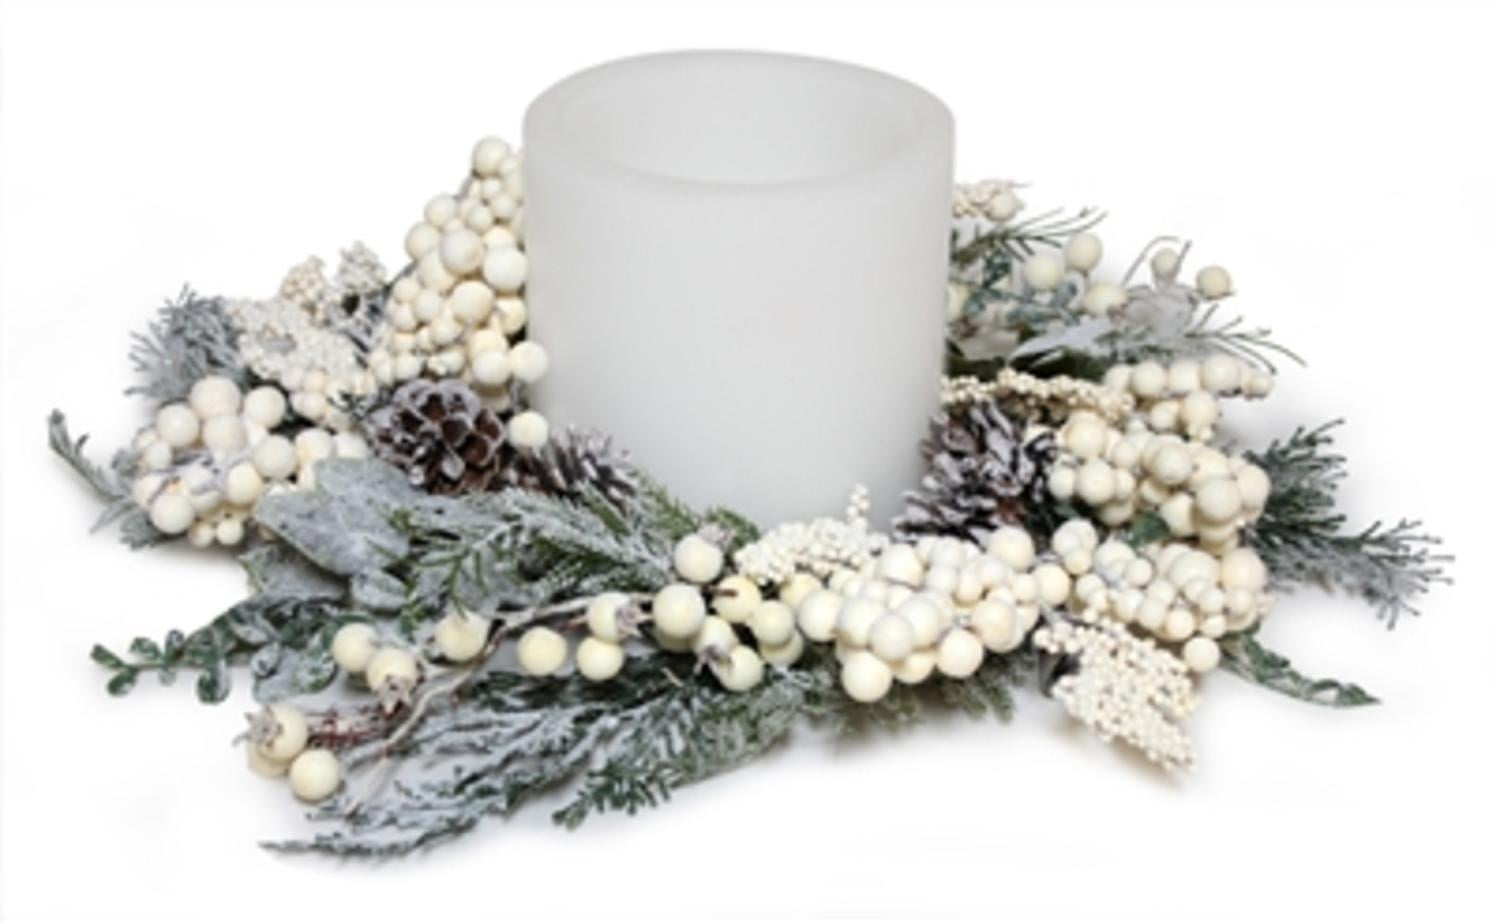 Pack Of 3 Artificial Frosted White Winterberry Christmas Pillar Candle Rings With Pine Cones 18 Walmart Com Walmart Com